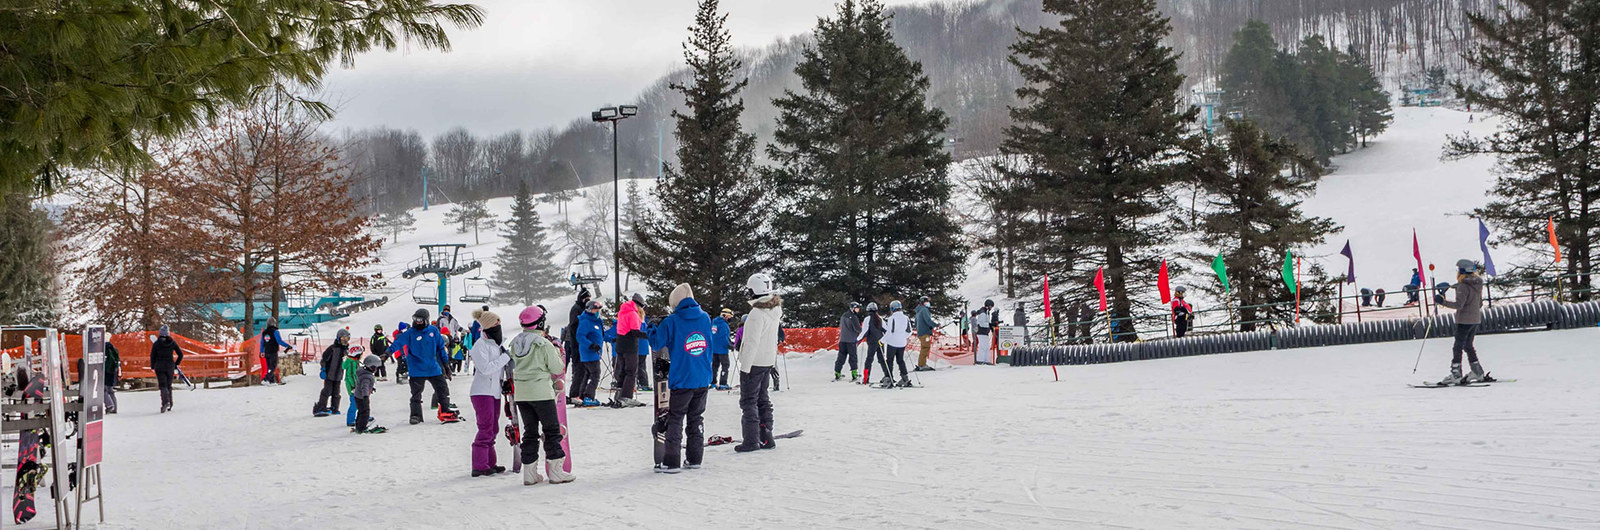 Beginners learn to ski and ride area